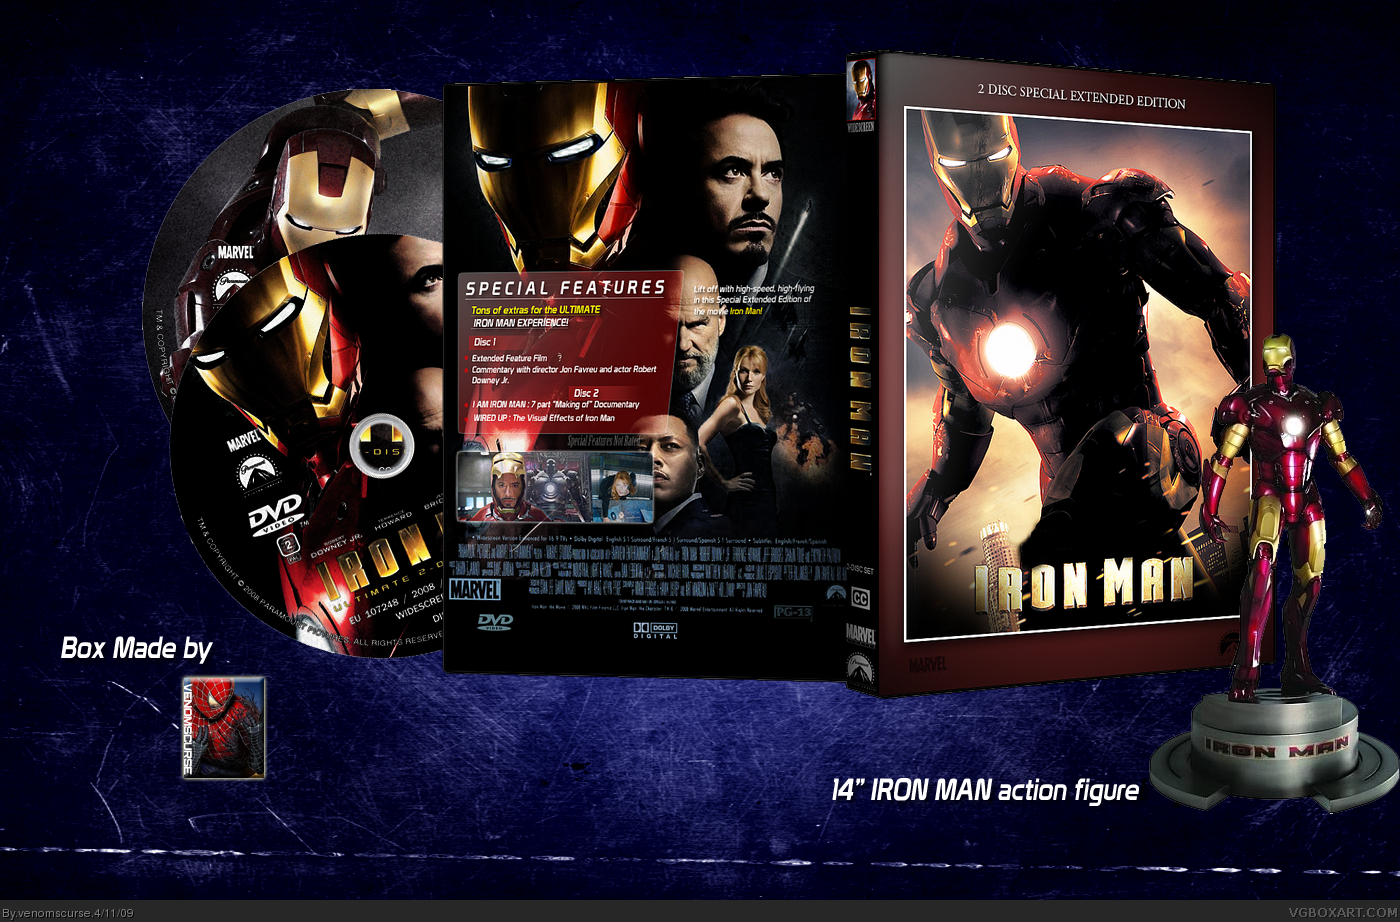 Iron Man: 2 Disc Special Extended Edition box cover